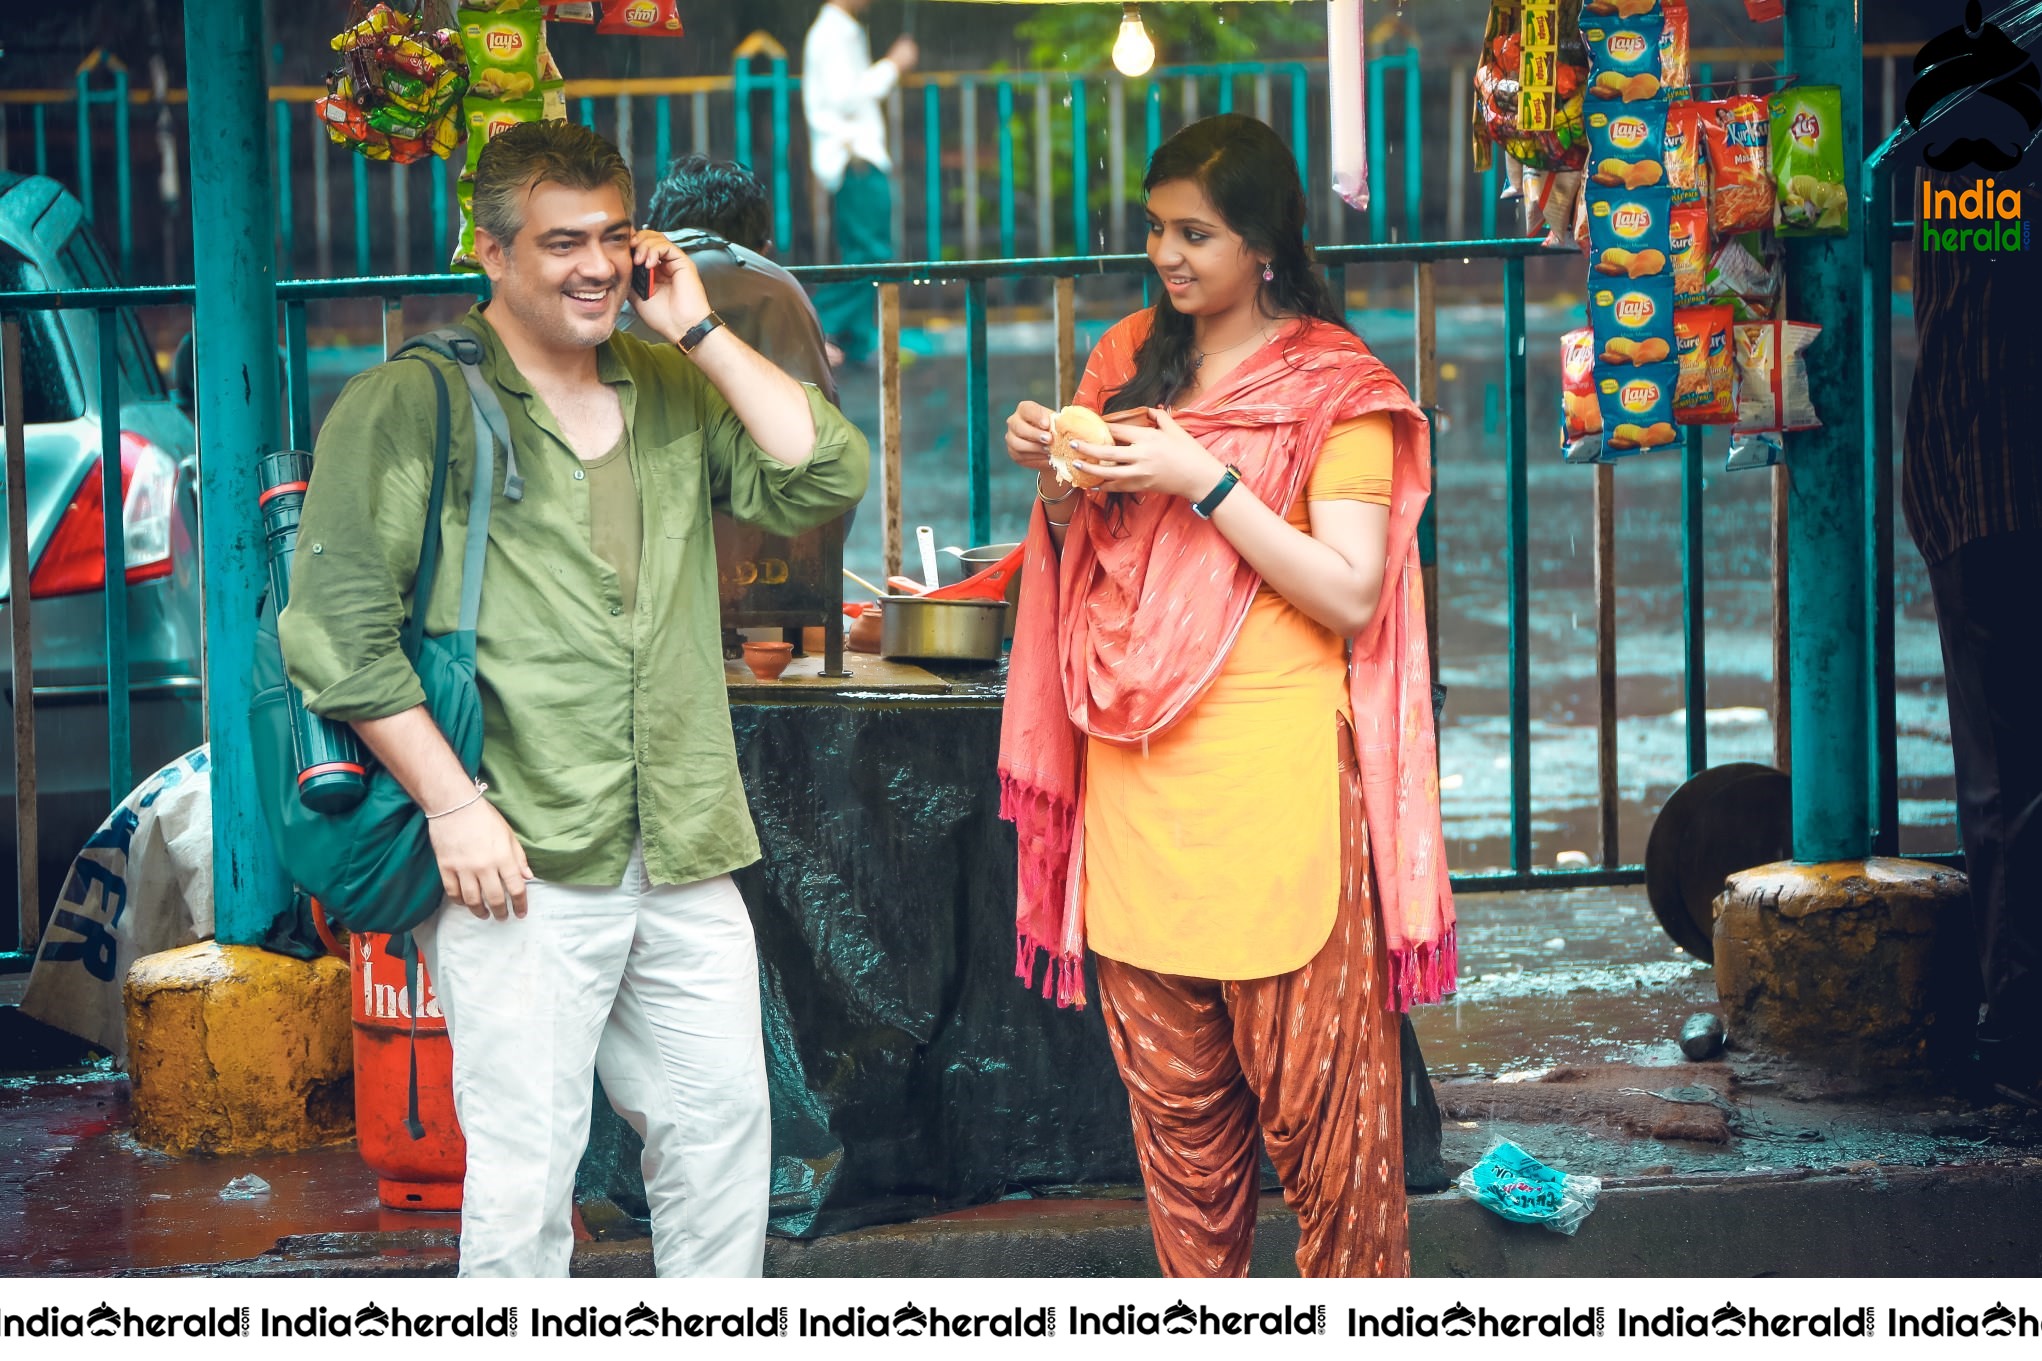 Rare and Unseen Stills of Ajith and Shruti Haasan in Vedalam Set 1